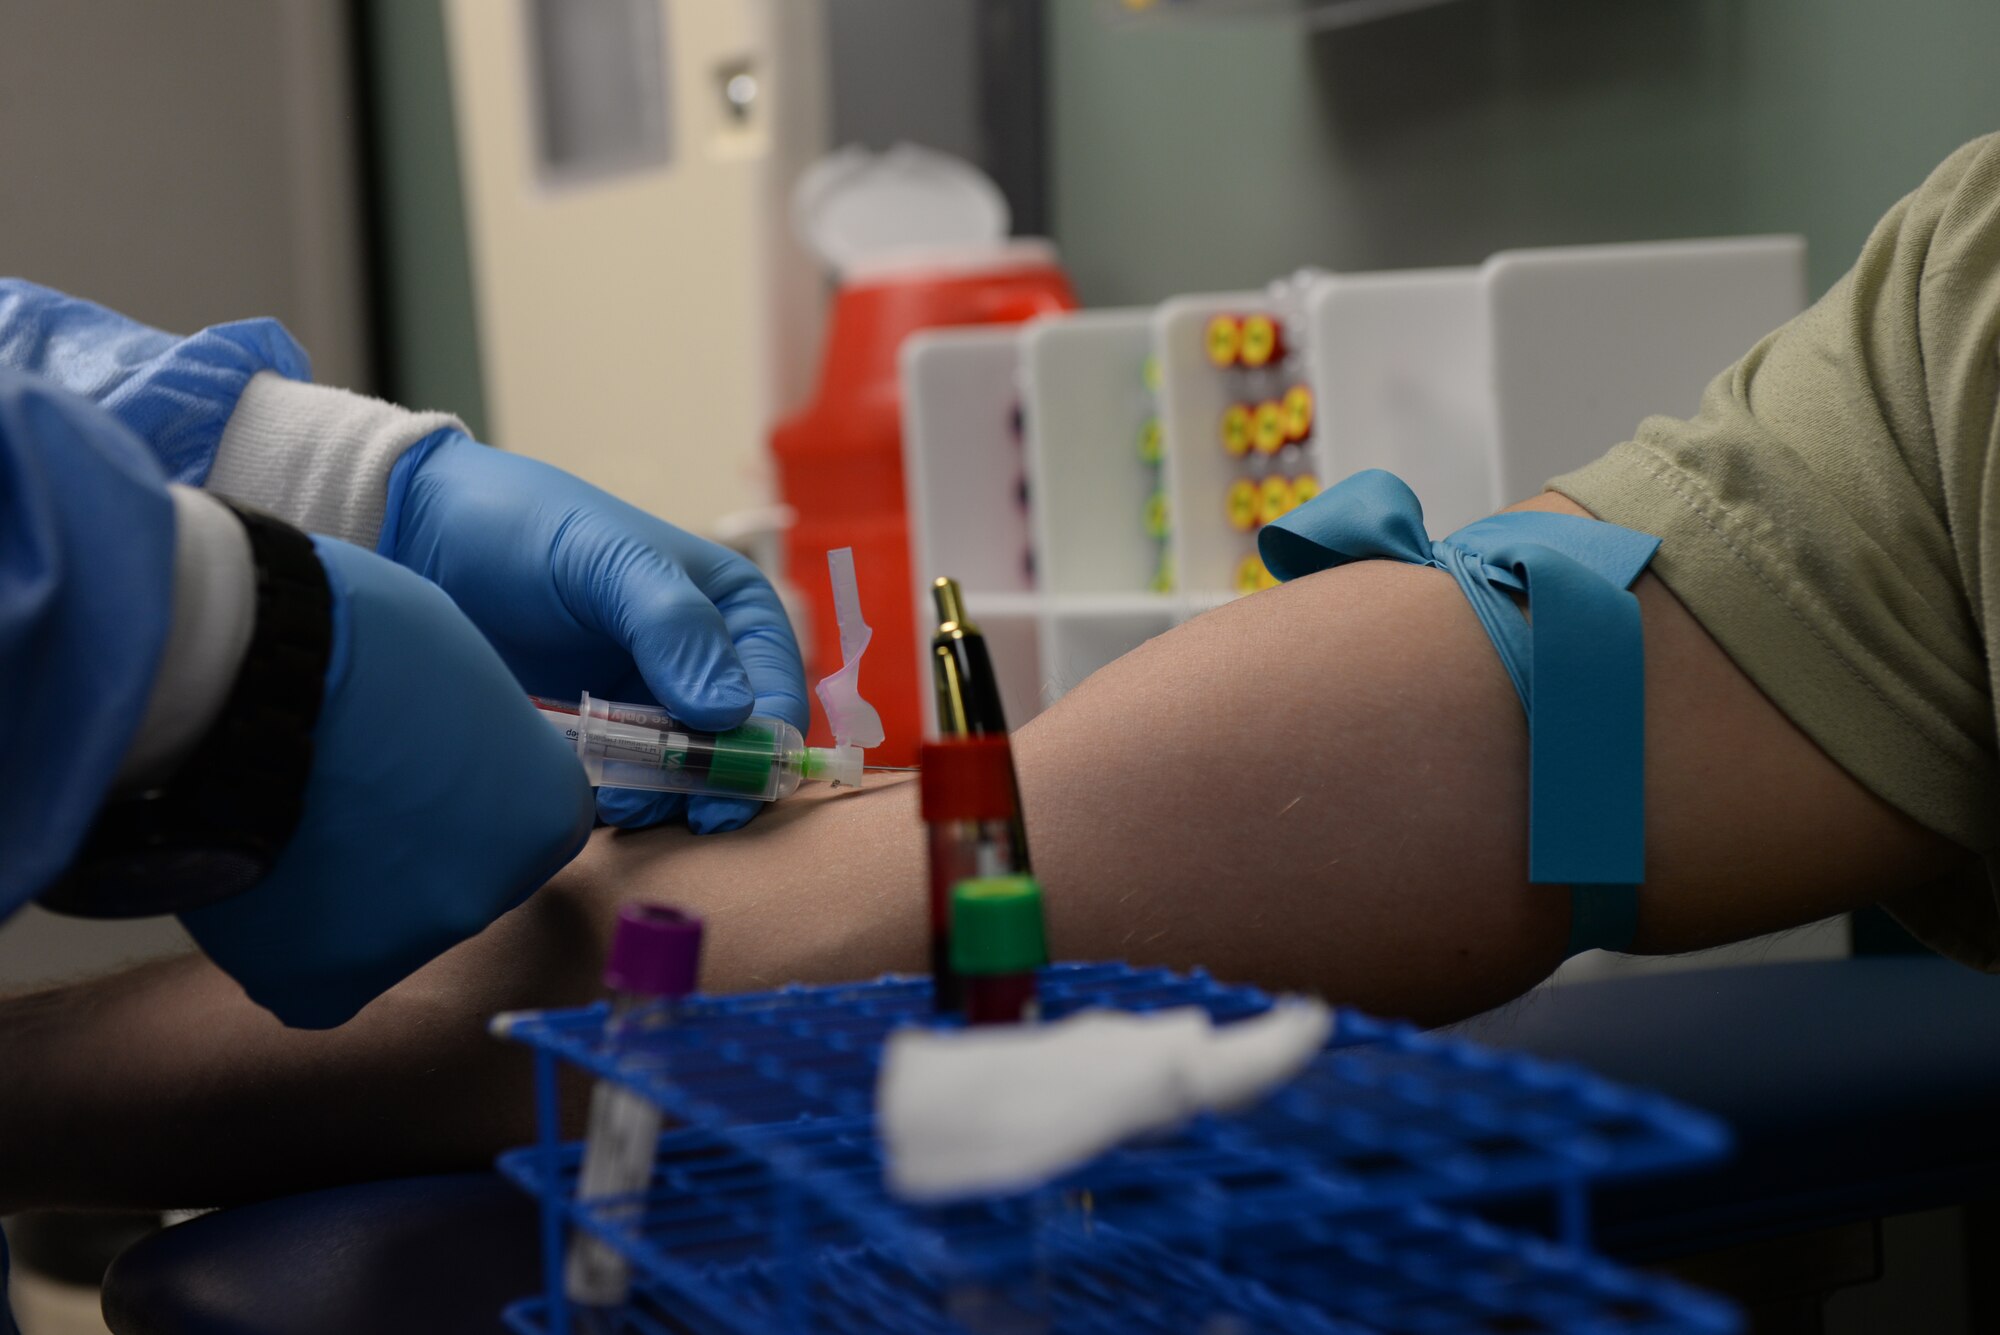 Airman 1st Class Mitchell Rostollan, a 28th Medical Support Squadron medical laboratory technician, draws an Airman's blood at Ellsworth Air Force Base, S.D., Dec. 4, 2018. The 28th Medical Group lab handles urinalysis, deployment readiness, sexually transmitted infection testing and other specialized functions for Department of Defense employees, retirees and families. (U.S. Air Force photo by Airman 1st Class Nicolas Z. Erwin)